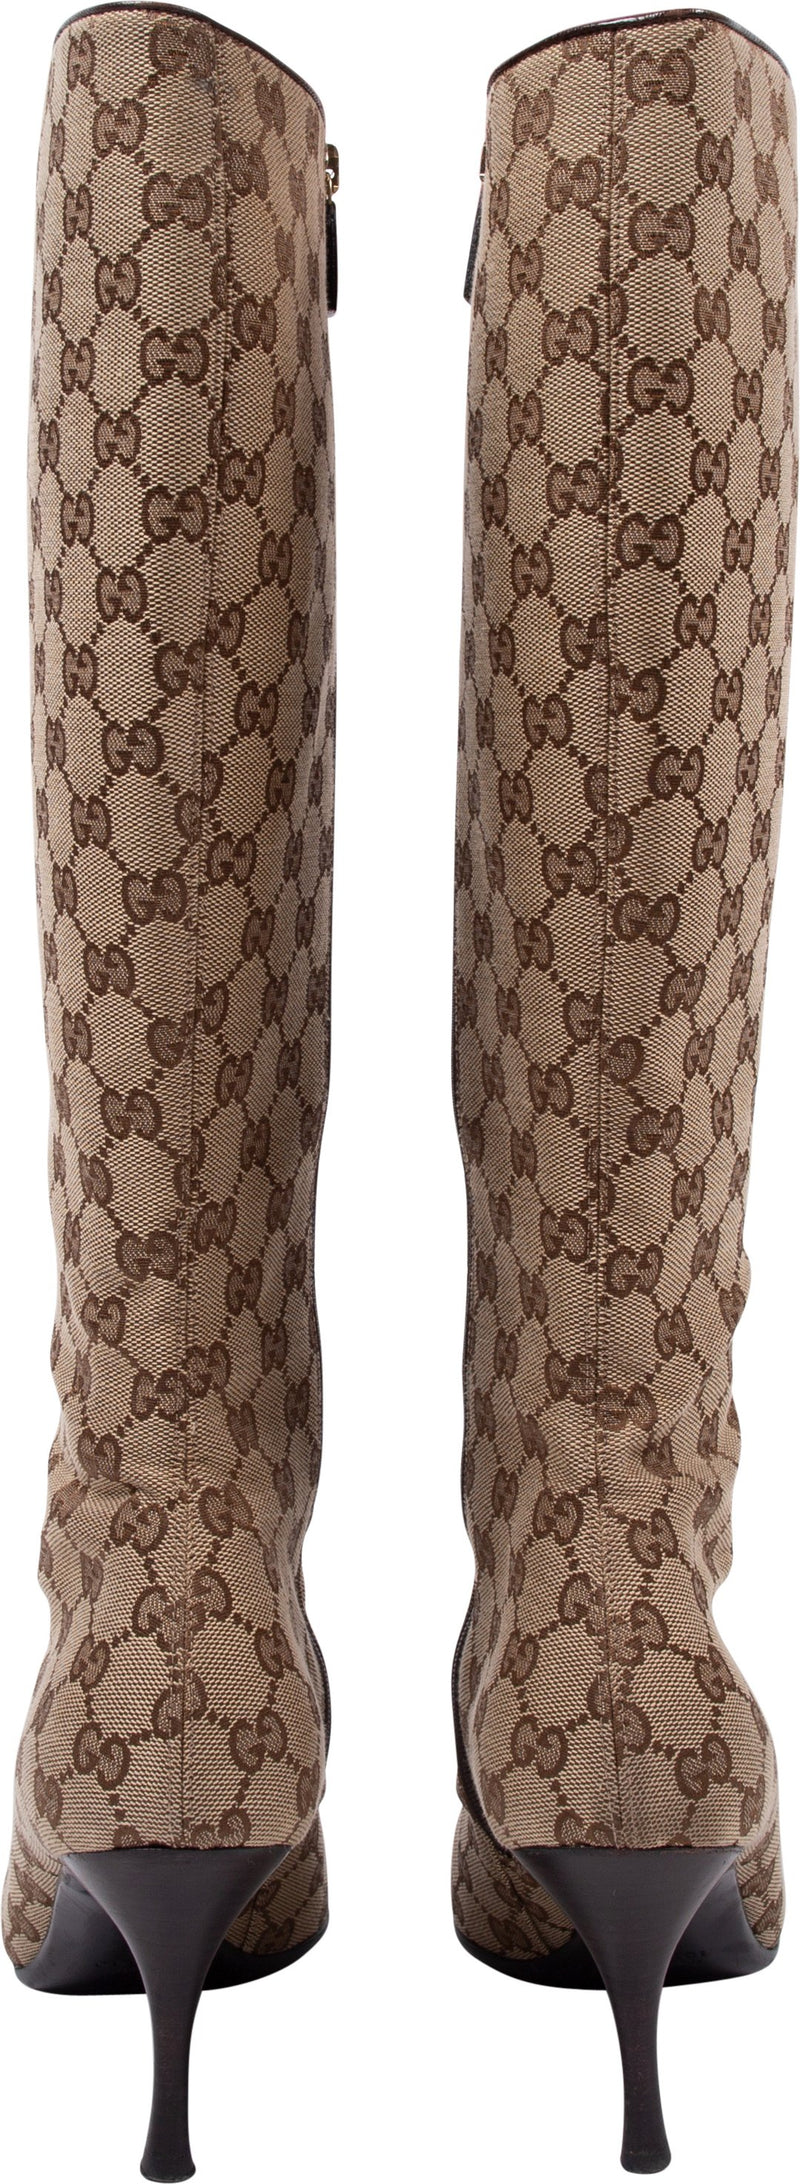 S/S 2004 Gucci by Tom Ford White Canvas & Leather Over Knee Boots